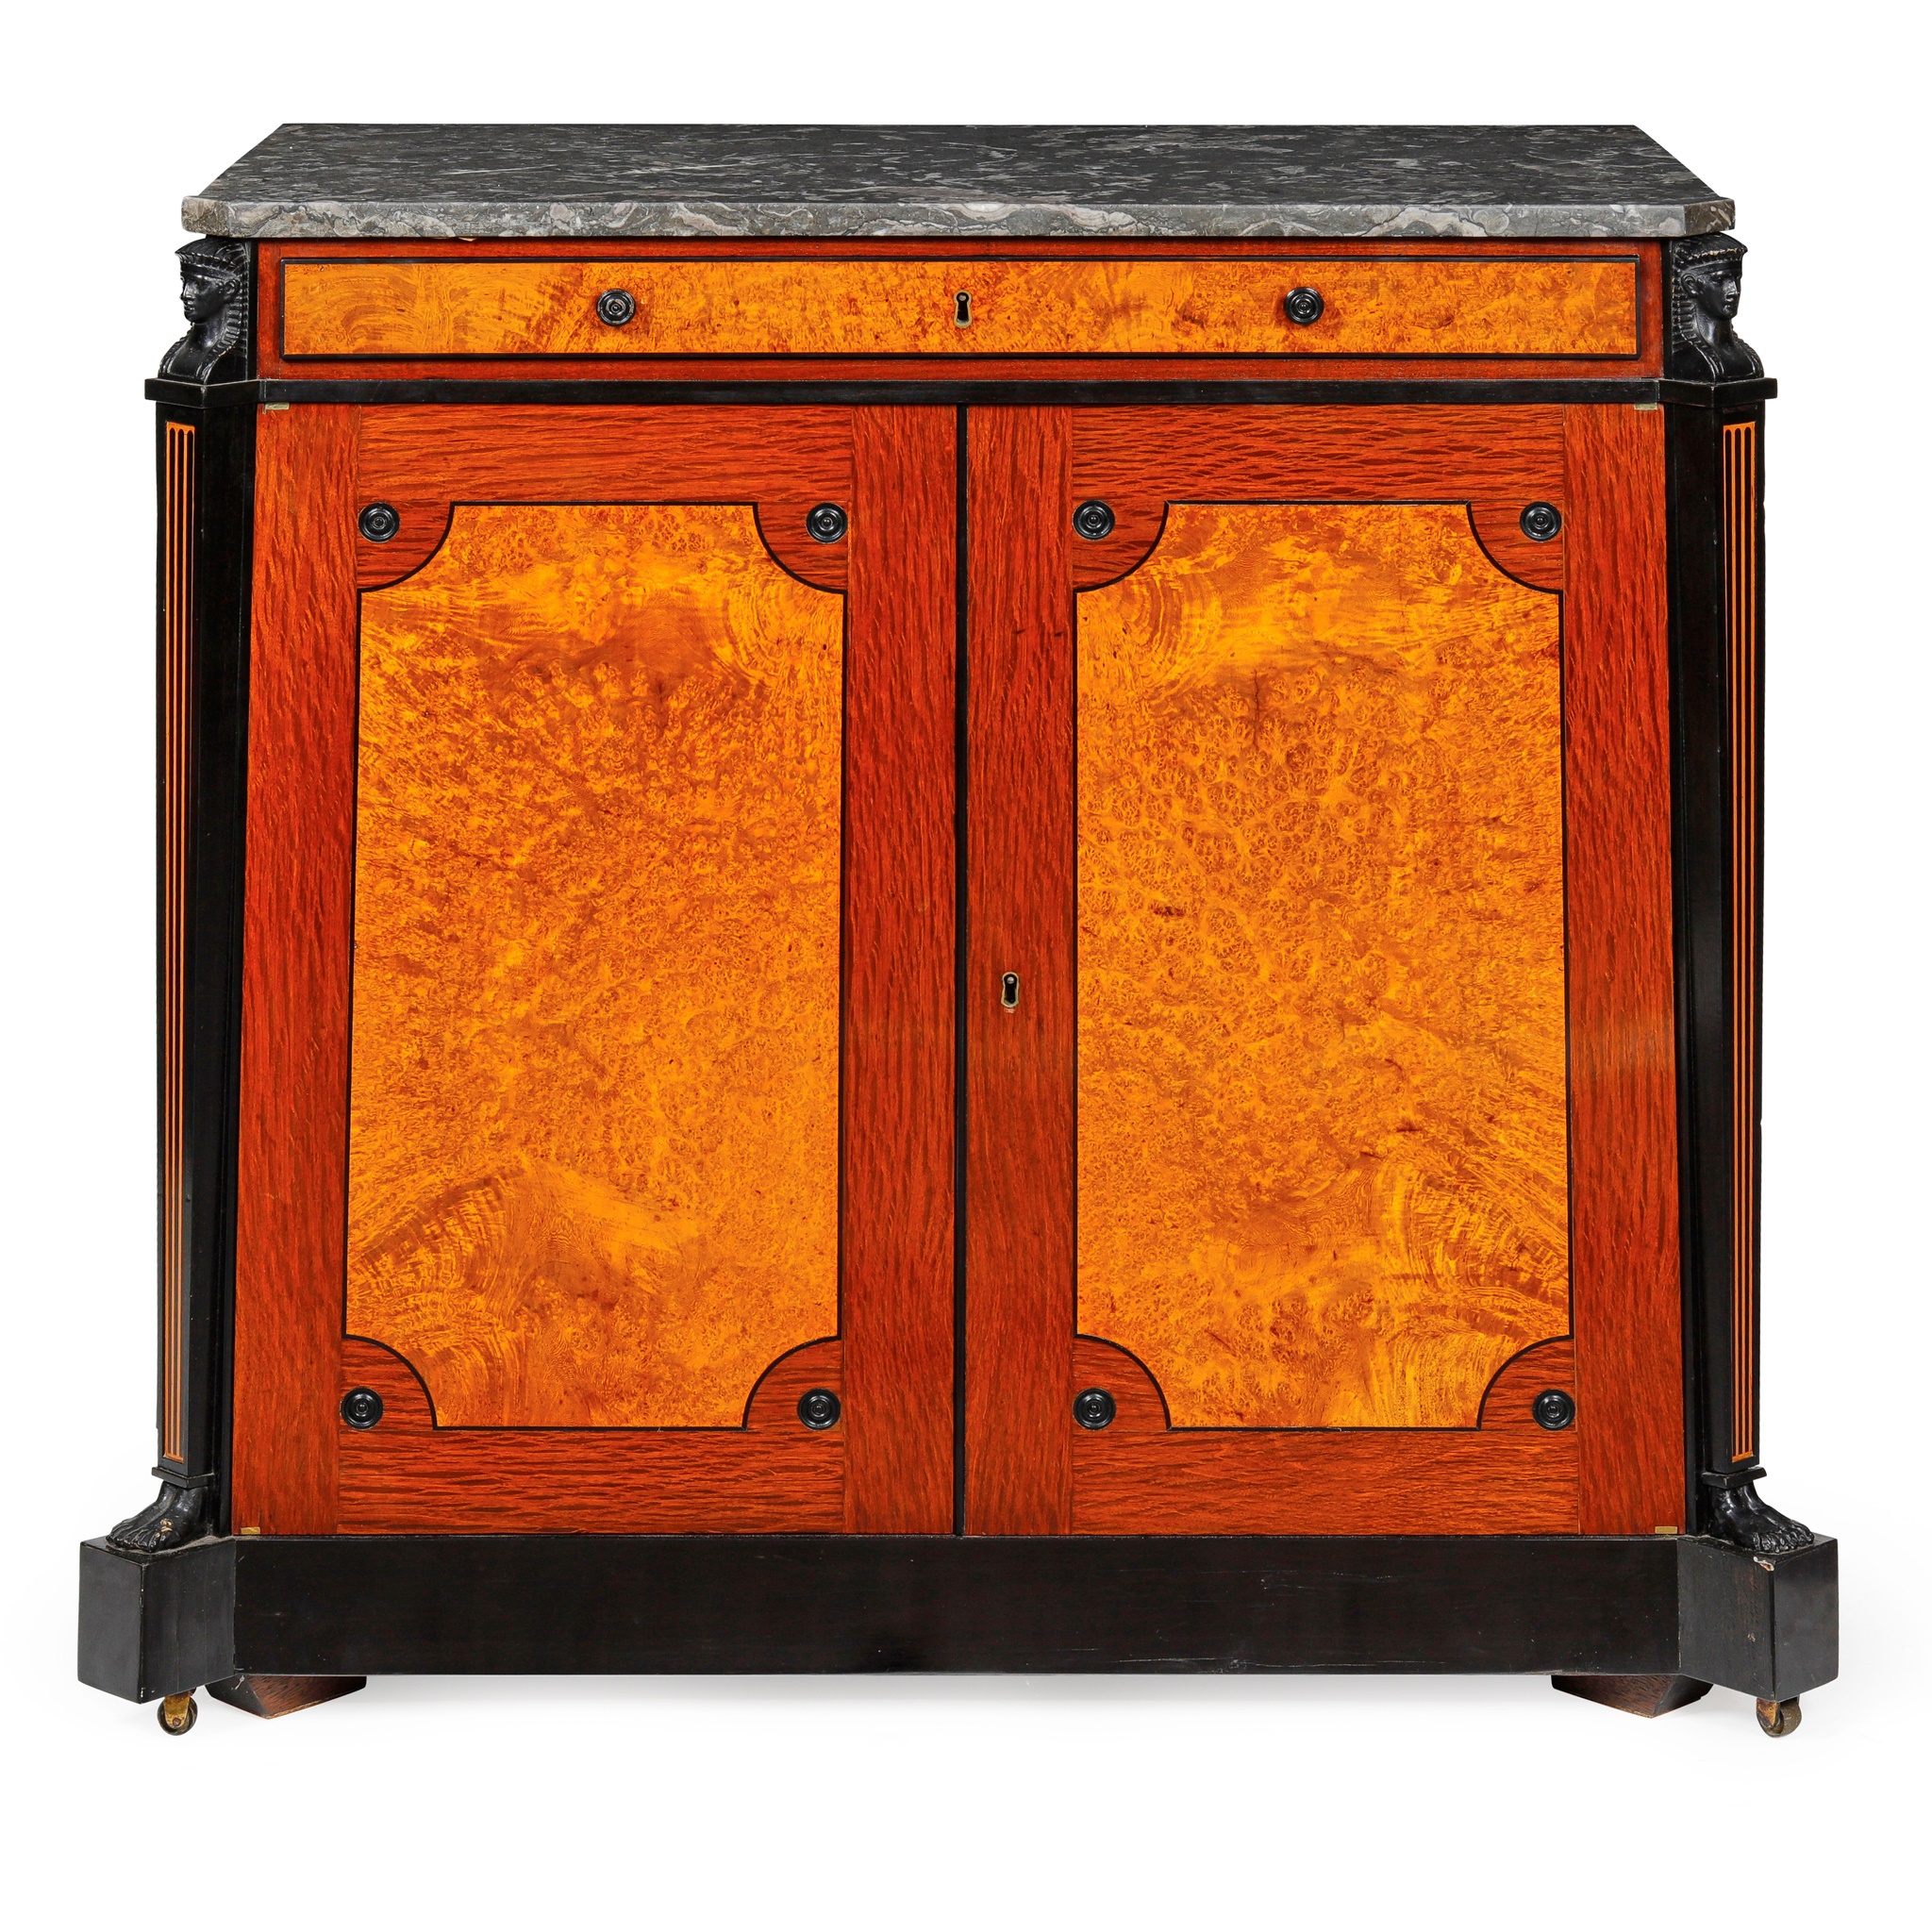 GEORGE IV MARBLE TOPPED AMBOYNA, PARTRIDGE WOOD AND EBONISED SIDE CABINET EARLY 19TH CENTURY - Image 3 of 4